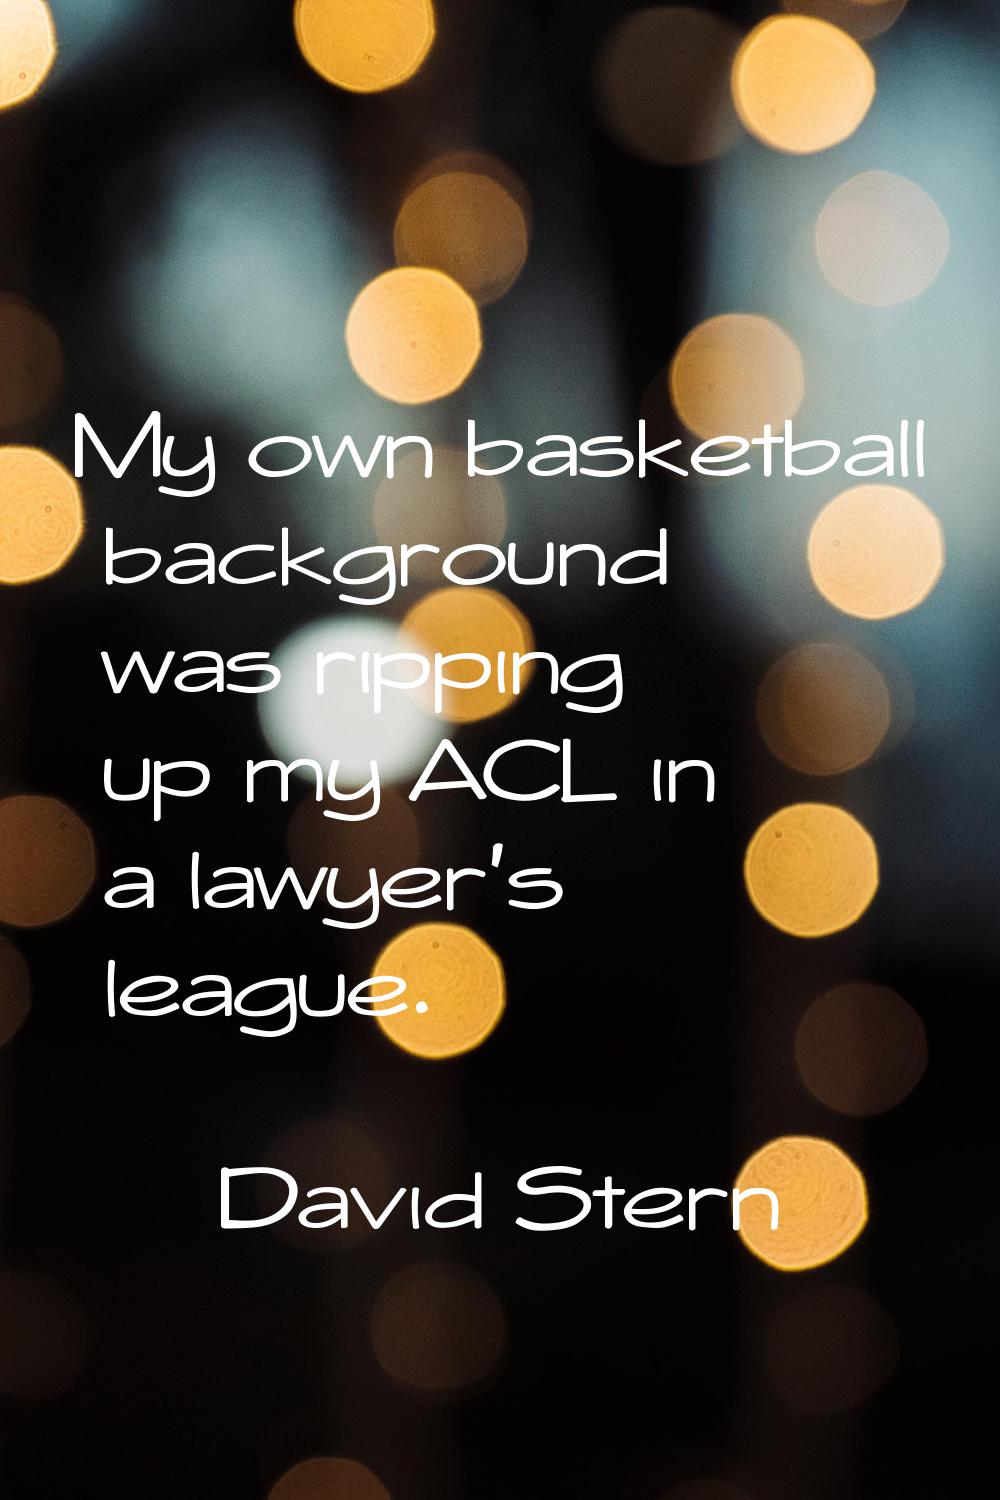 My own basketball background was ripping up my ACL in a lawyer's league.